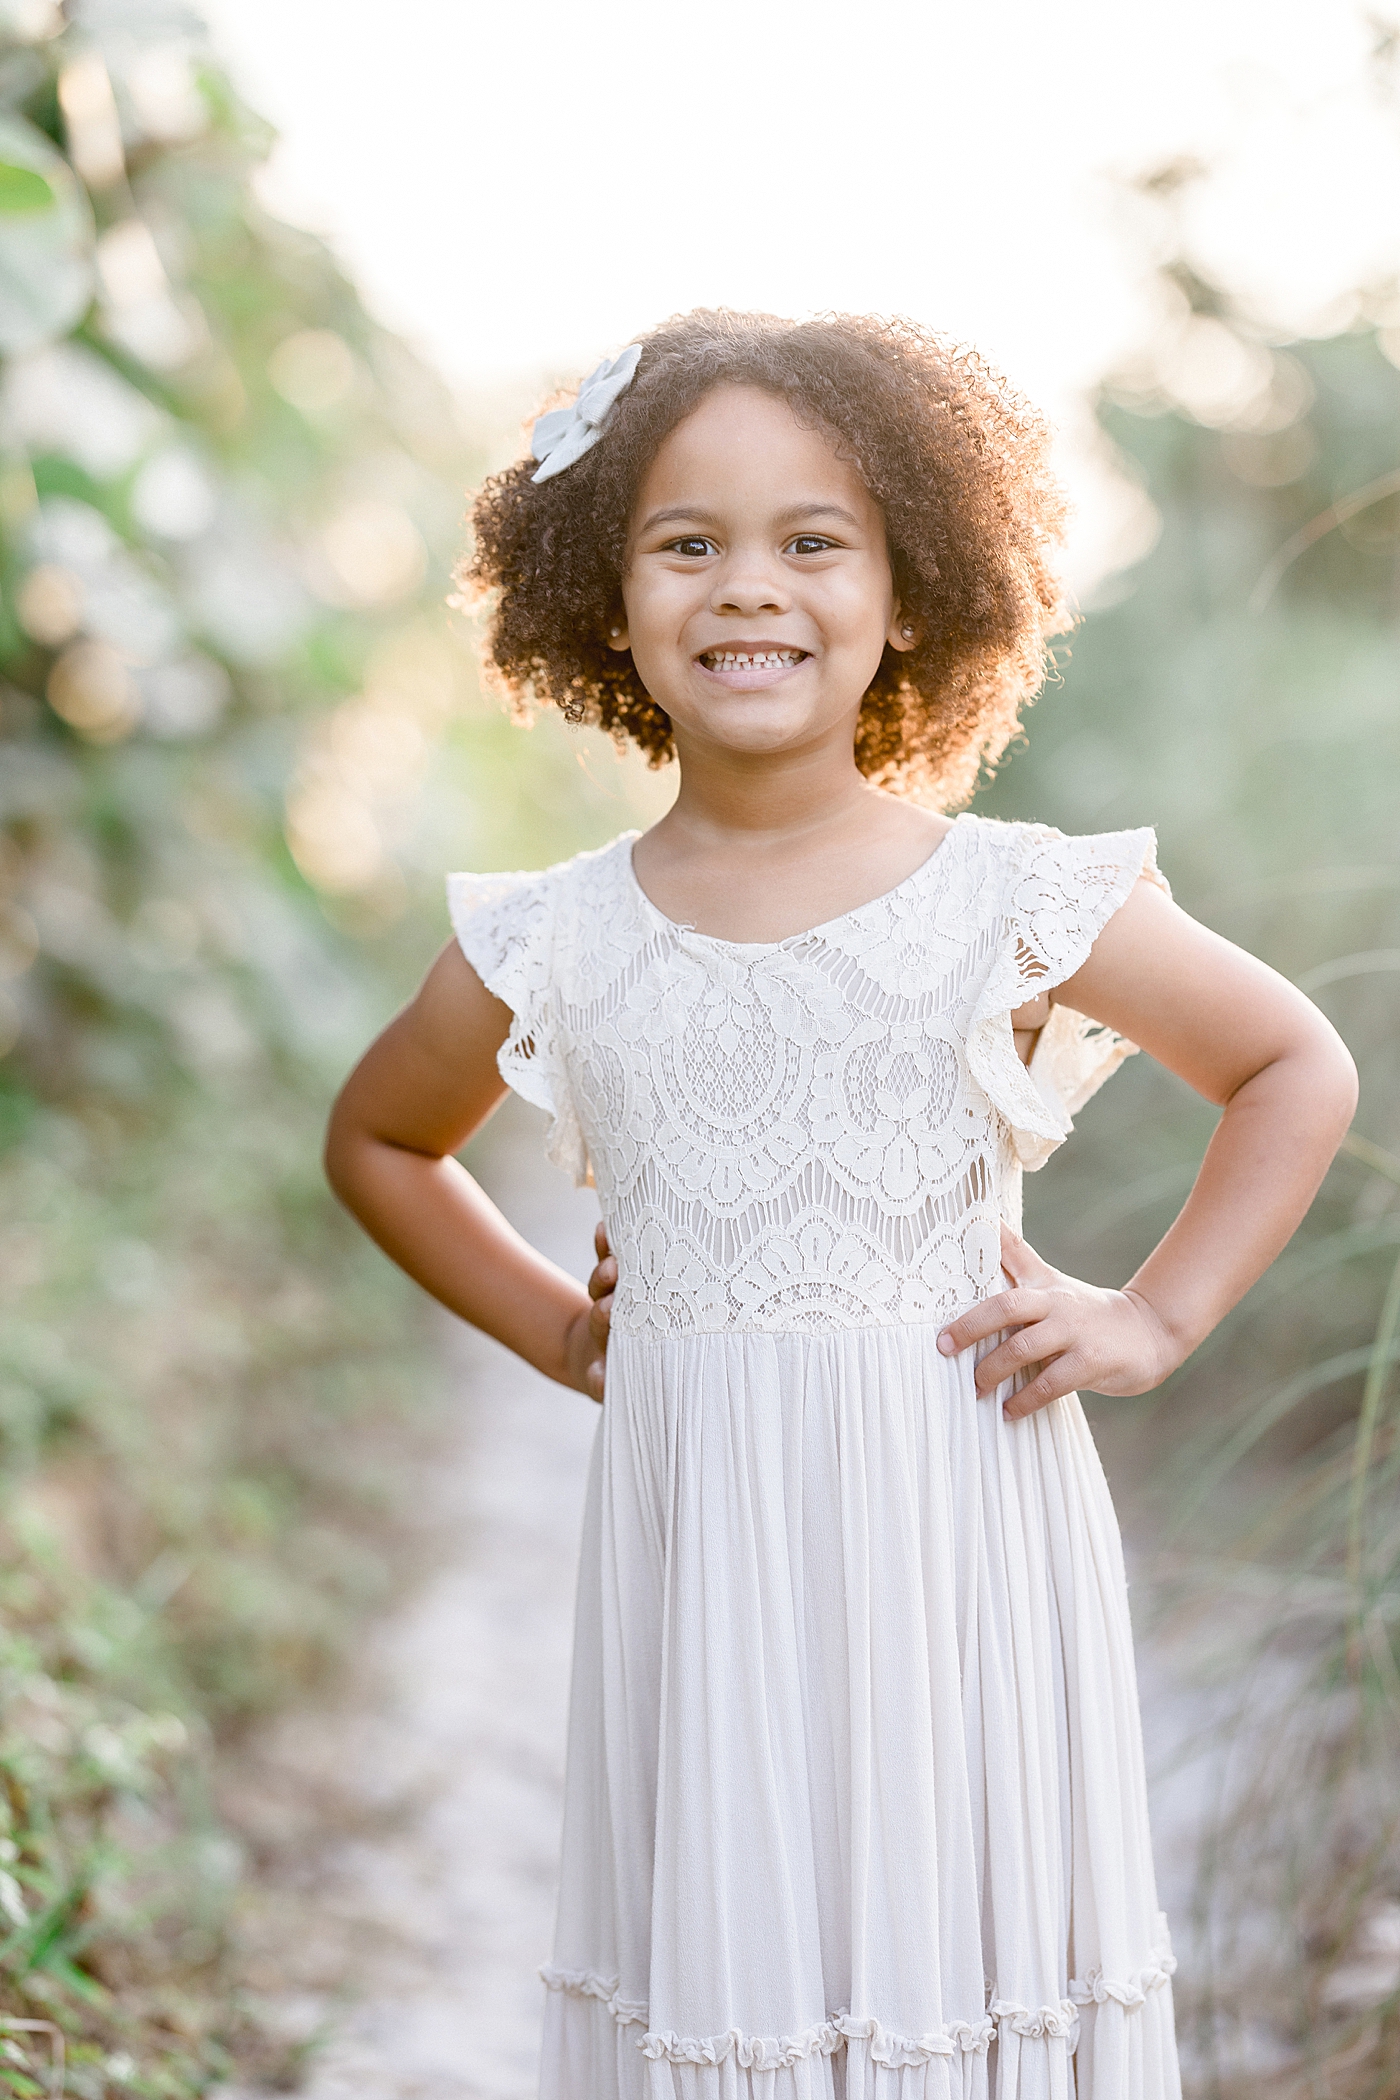 Children's portrait during sunset beach session. Photo by Brittany Elise Photography.